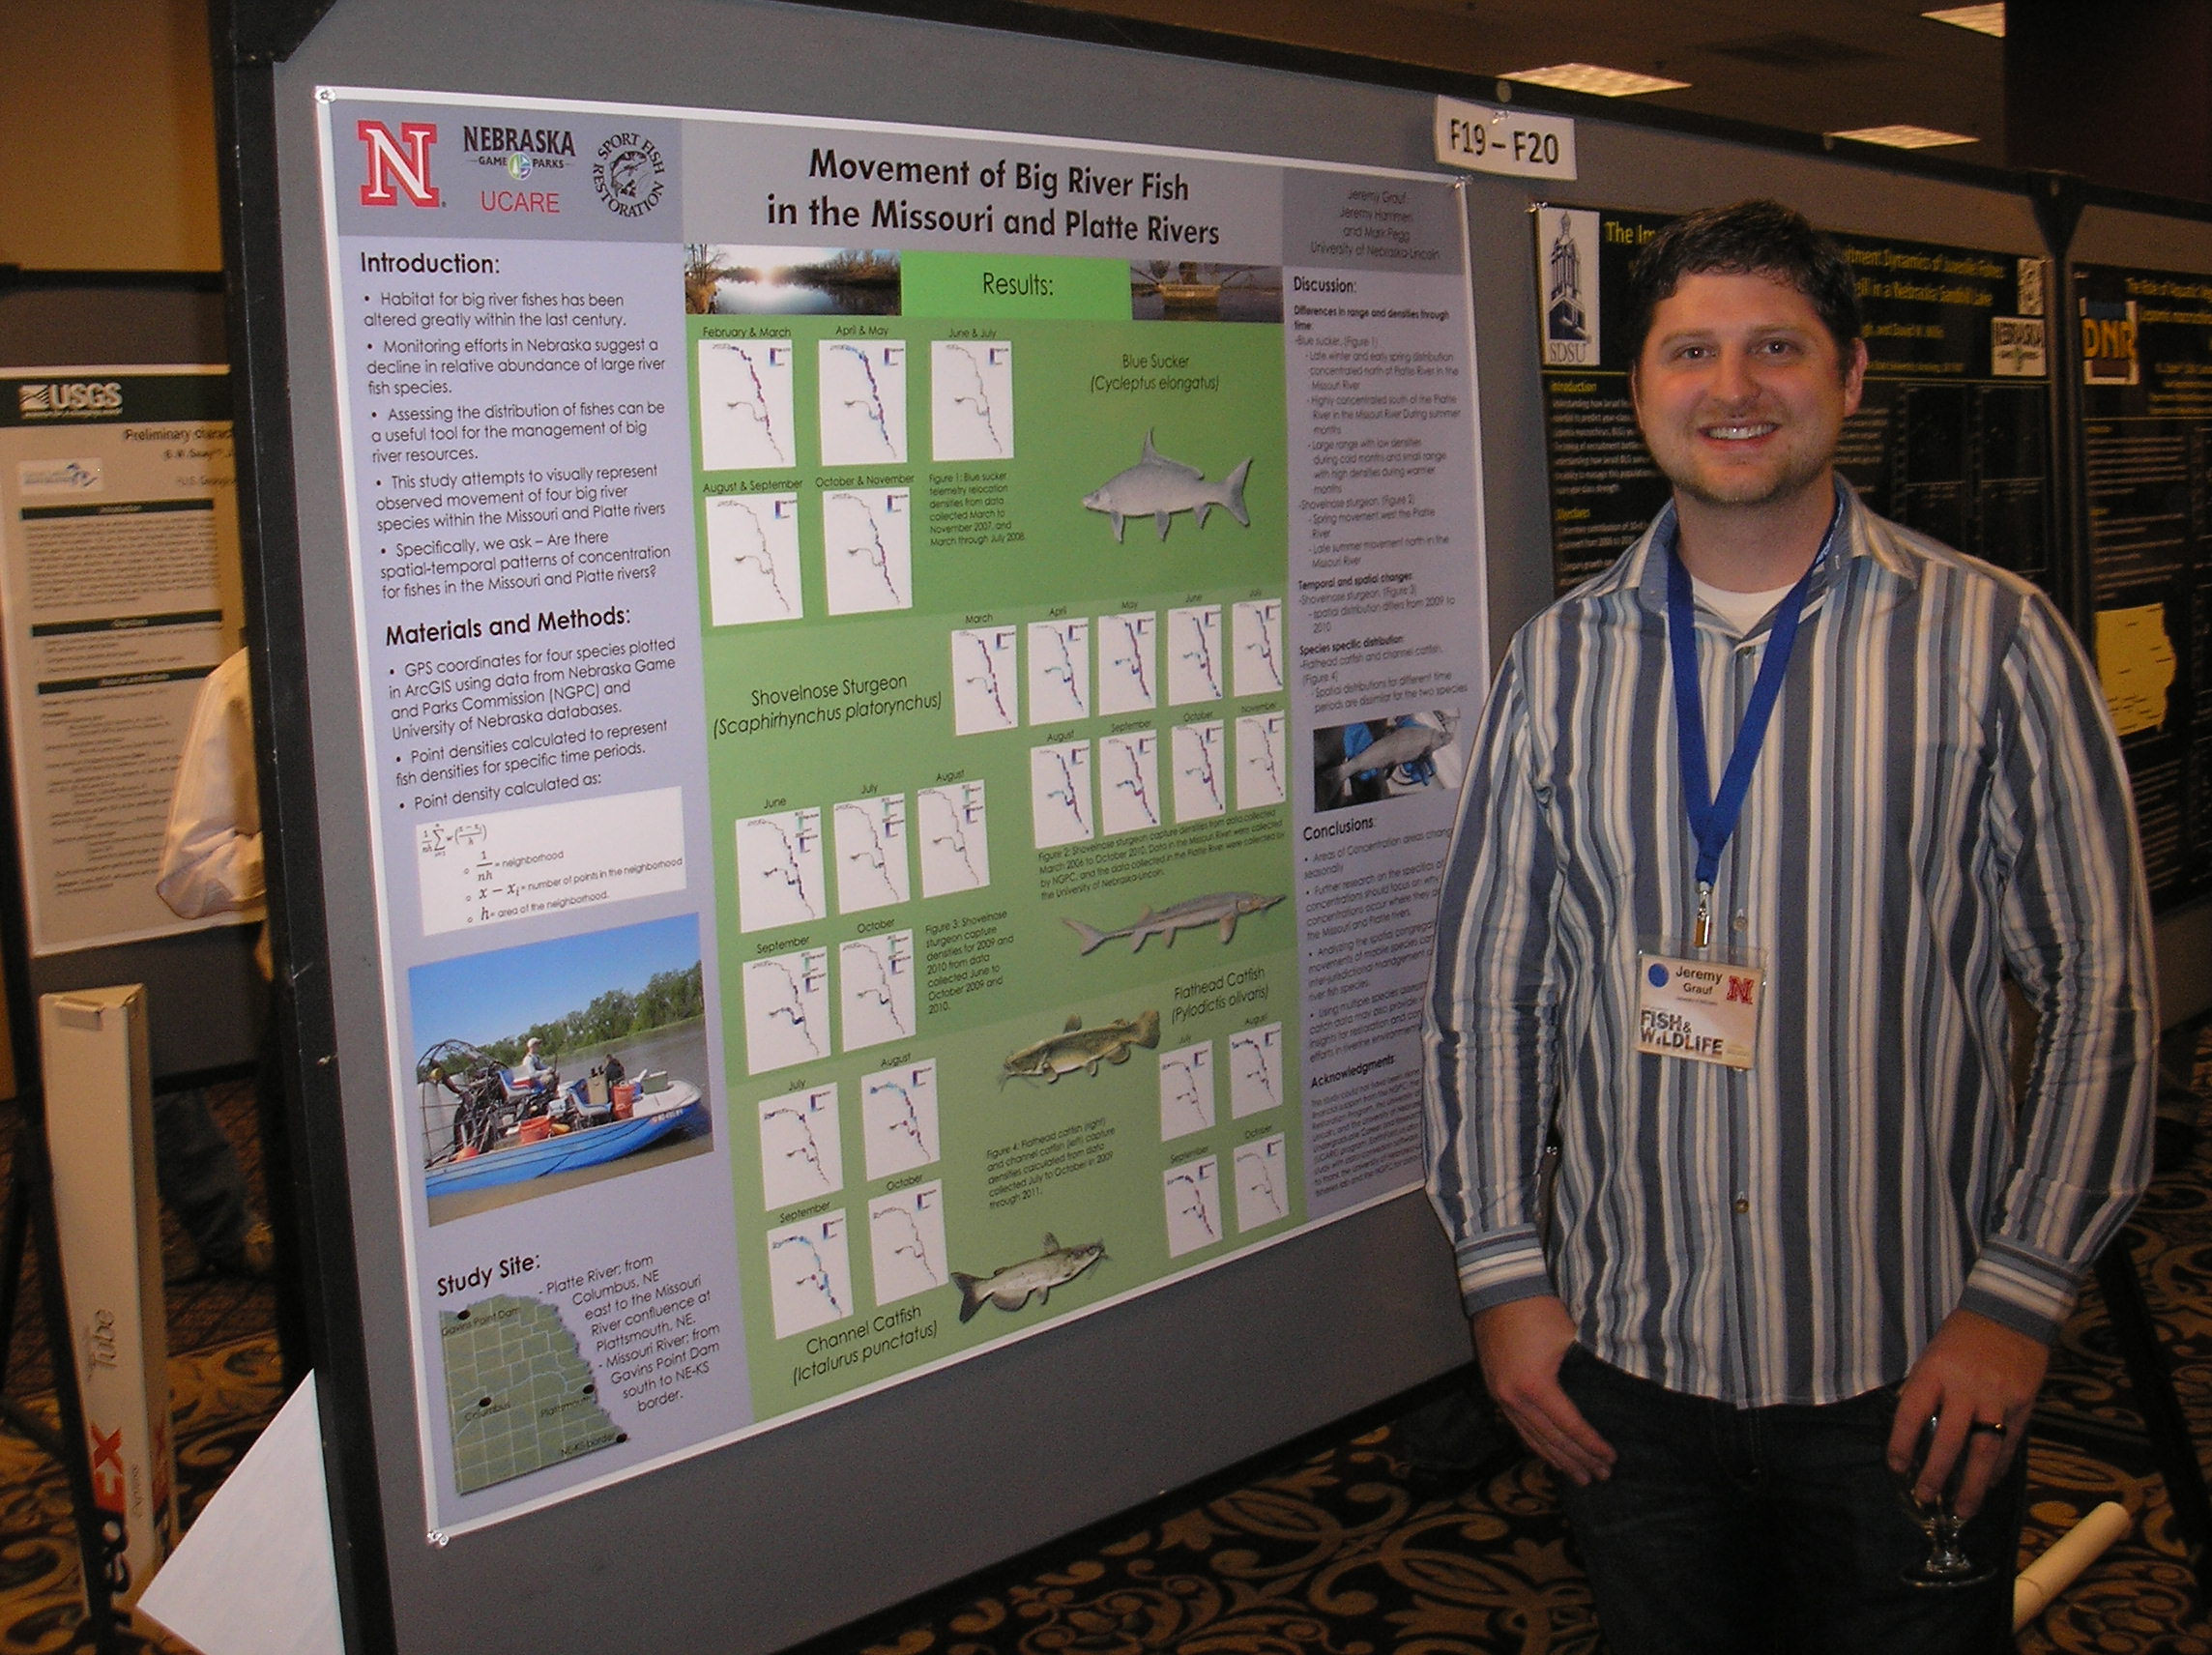 Jeremy Grauf, a Fisheries and Wildlife student, presented a poster on Movement of Big River Fish in the Missouri and Platte Rivers at the 2011 Midwest Fish and Wildlife Conference.